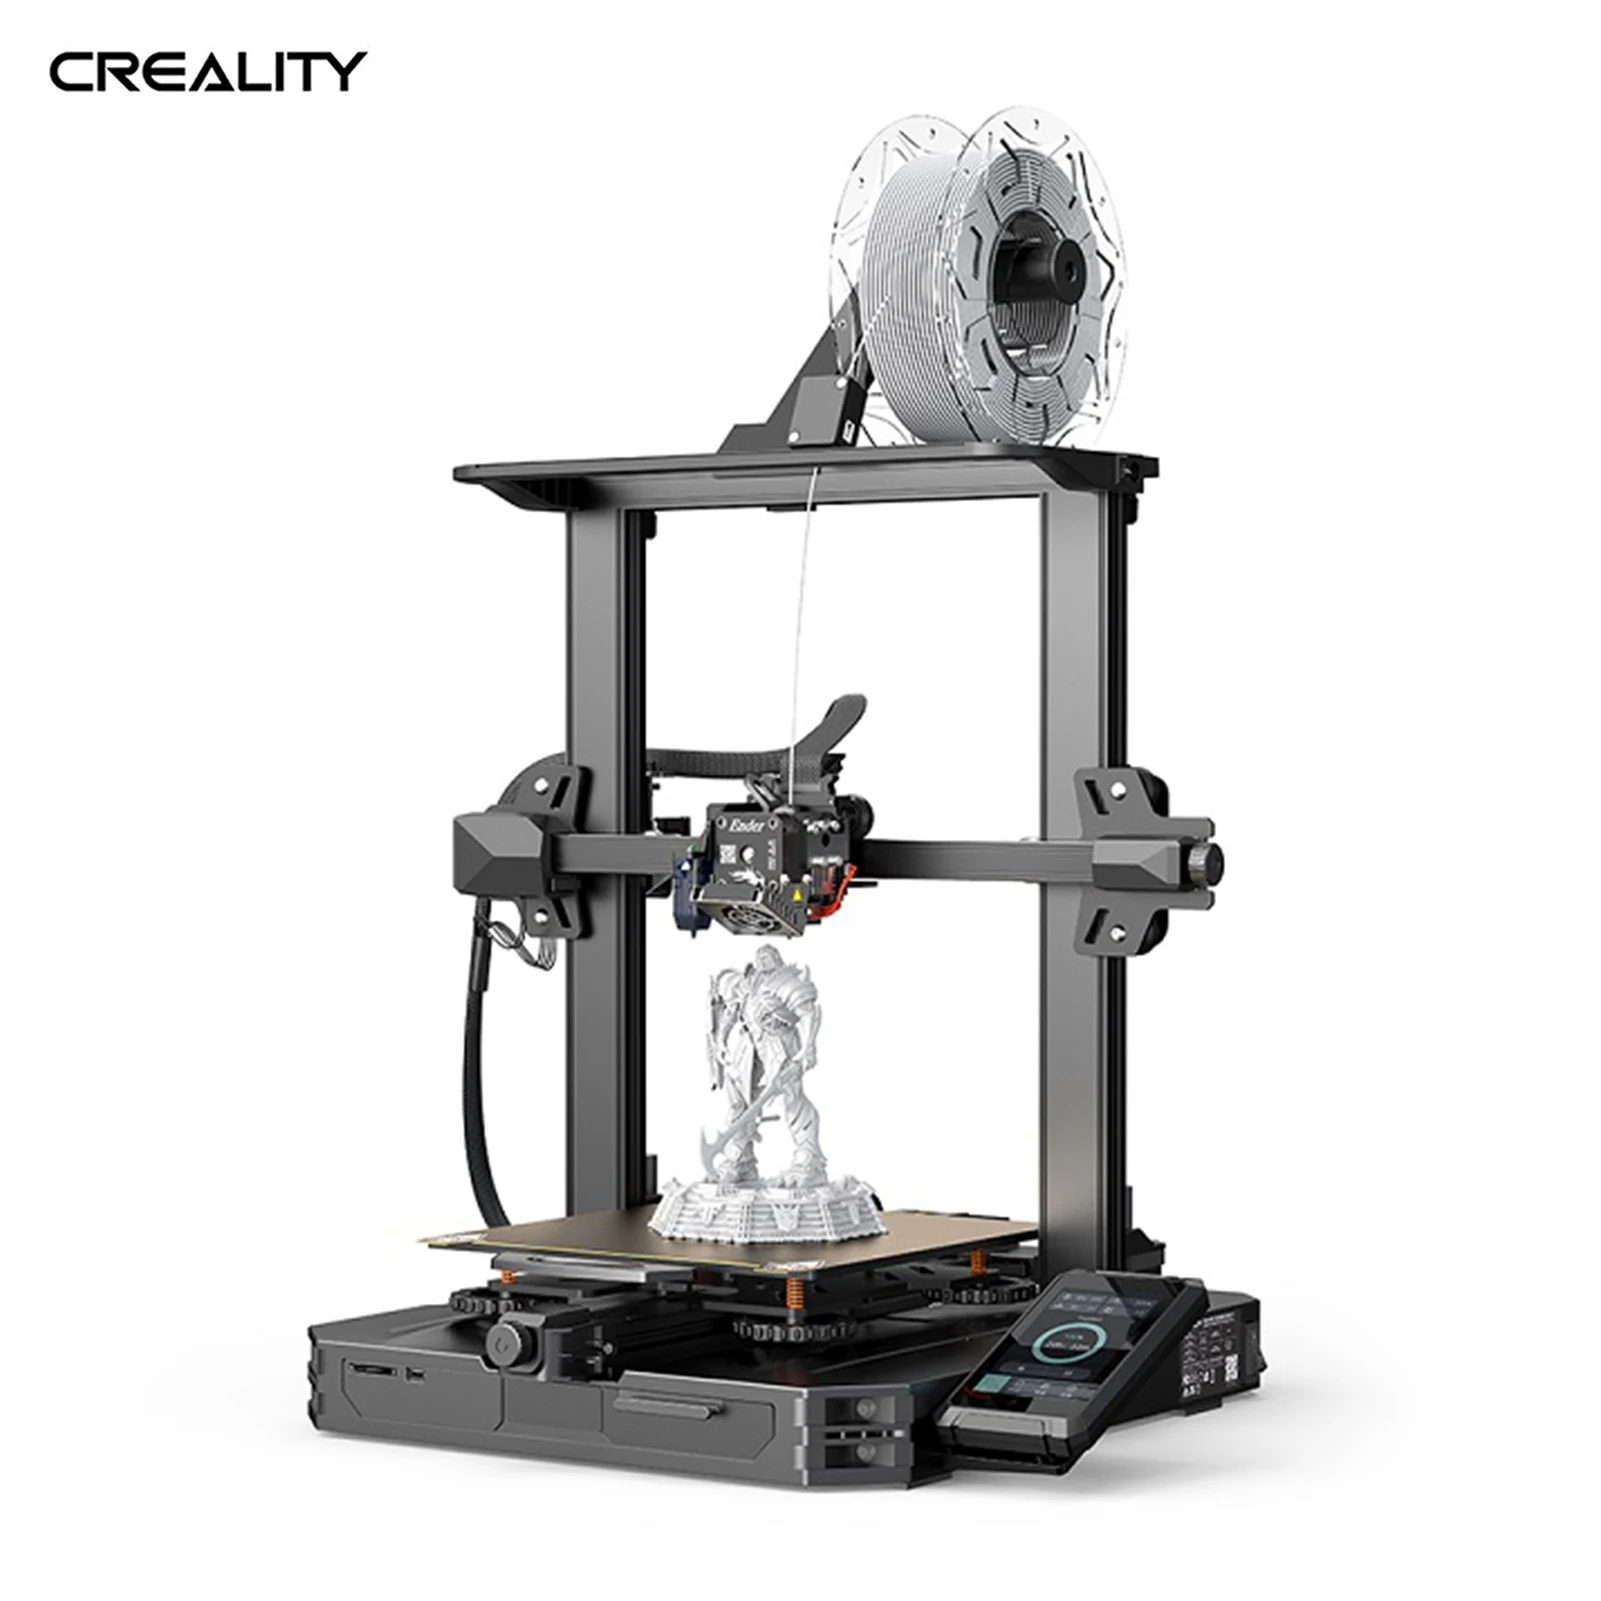 Original CREALITY Ender-3 S1 Pro 3D Printer CR Touch Automatic Levelling High-performance Printer With 220*220*270mm Print Size 